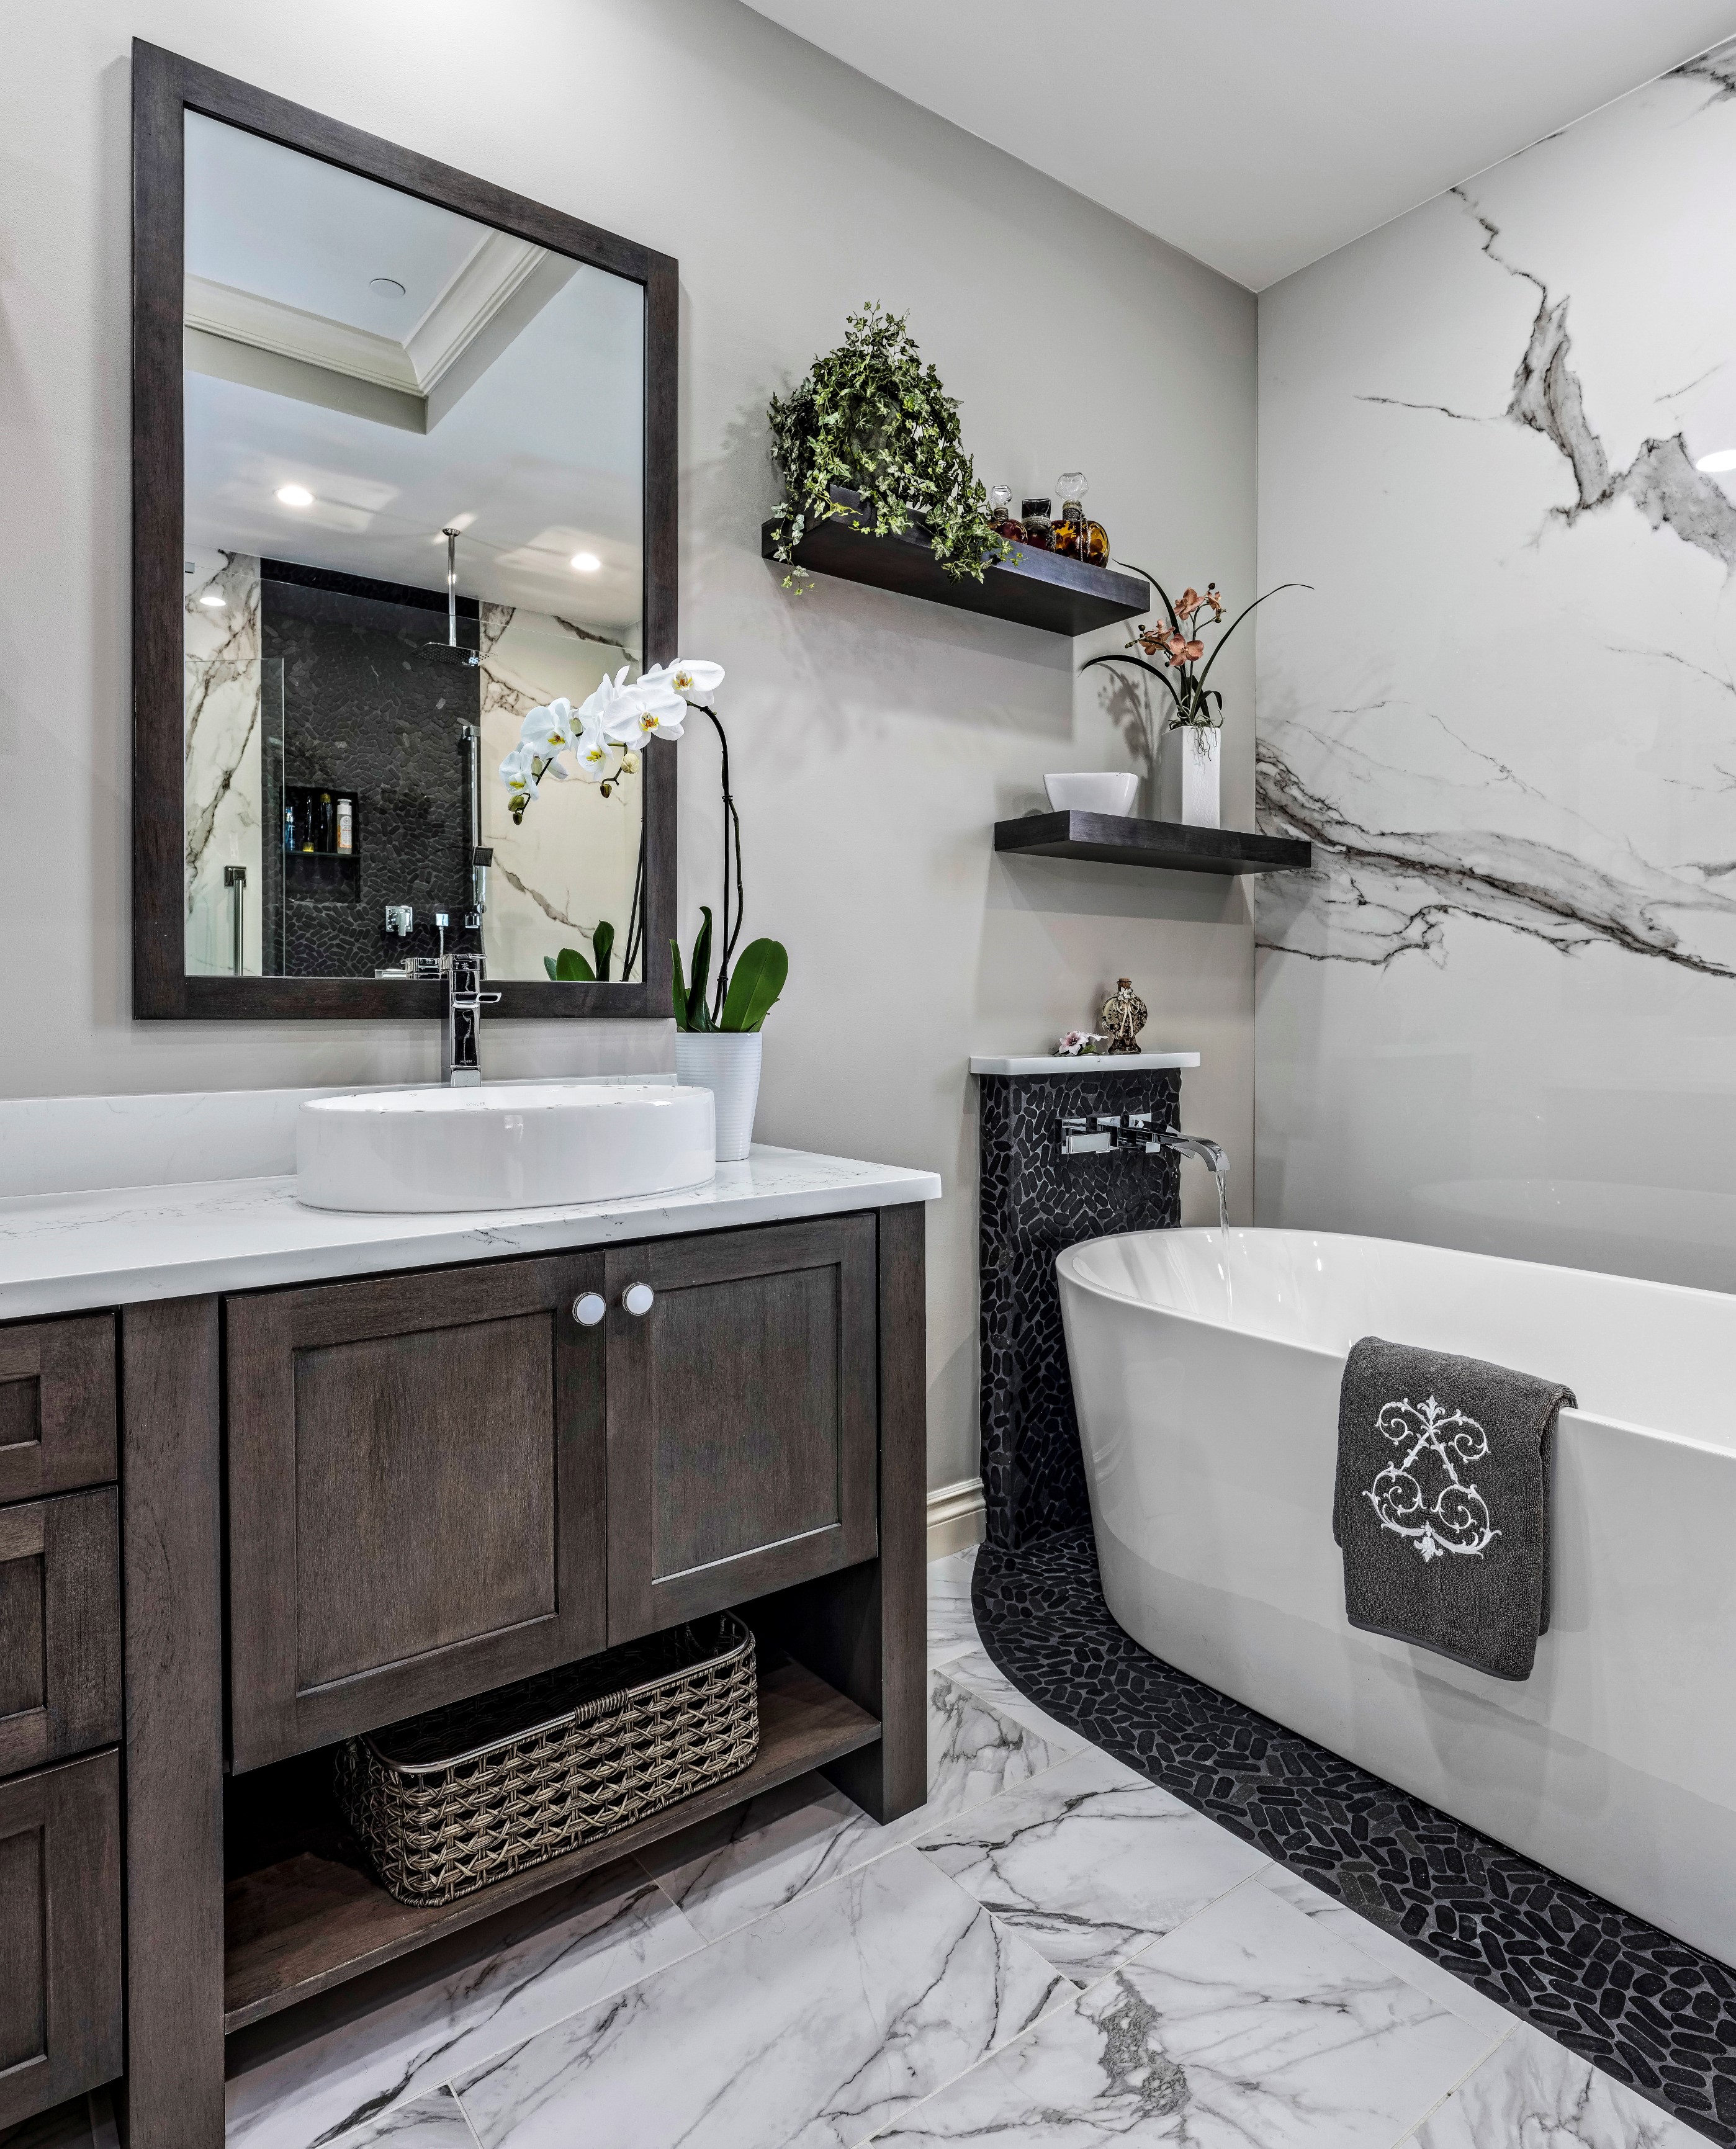 Bathroom Remodeling Typically Cost, How Much Does It Cost To Reno A Small Bathroom